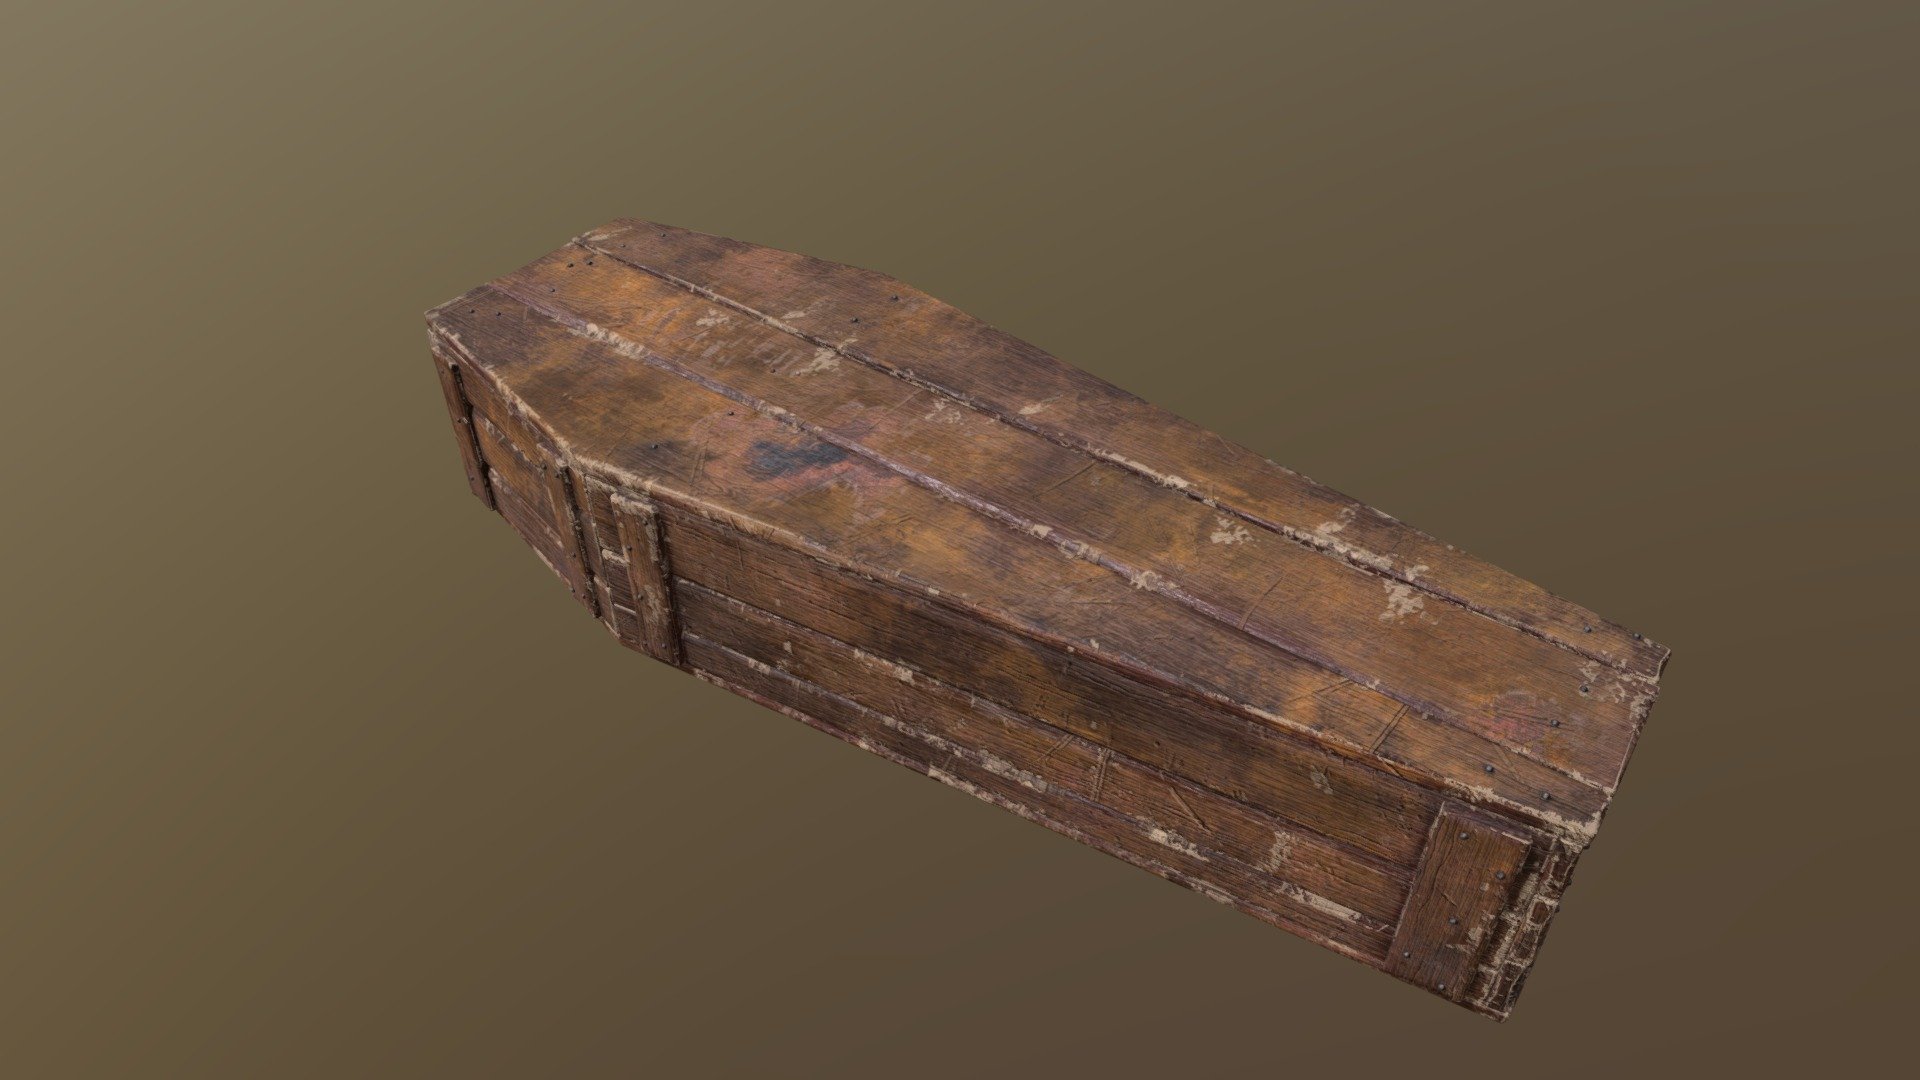 Rustic Wooden Coffin 3D Model. This model contains the Rustic Wooden Coffin itself 

All modeled in Maya, textured with Substance Painter.

The model was built to scale and is UV unwrapped properly. Contains only one 4K texture set.  

⦁   15072 tris. 

⦁   Contains: .FBX .OBJ and .DAE

⦁   Model has clean topology. No Ngons.

⦁   Built to scale

⦁   Unwrapped UV Map

⦁   4K Texture set

⦁   High quality details

⦁   Based on real life references

⦁   Renders done in Marmoset Toolbag

Polycount: 

Verts 7981

Edges 15432

Faces 7596

Tris 15072

If you have any questions please feel free to ask me 3d model